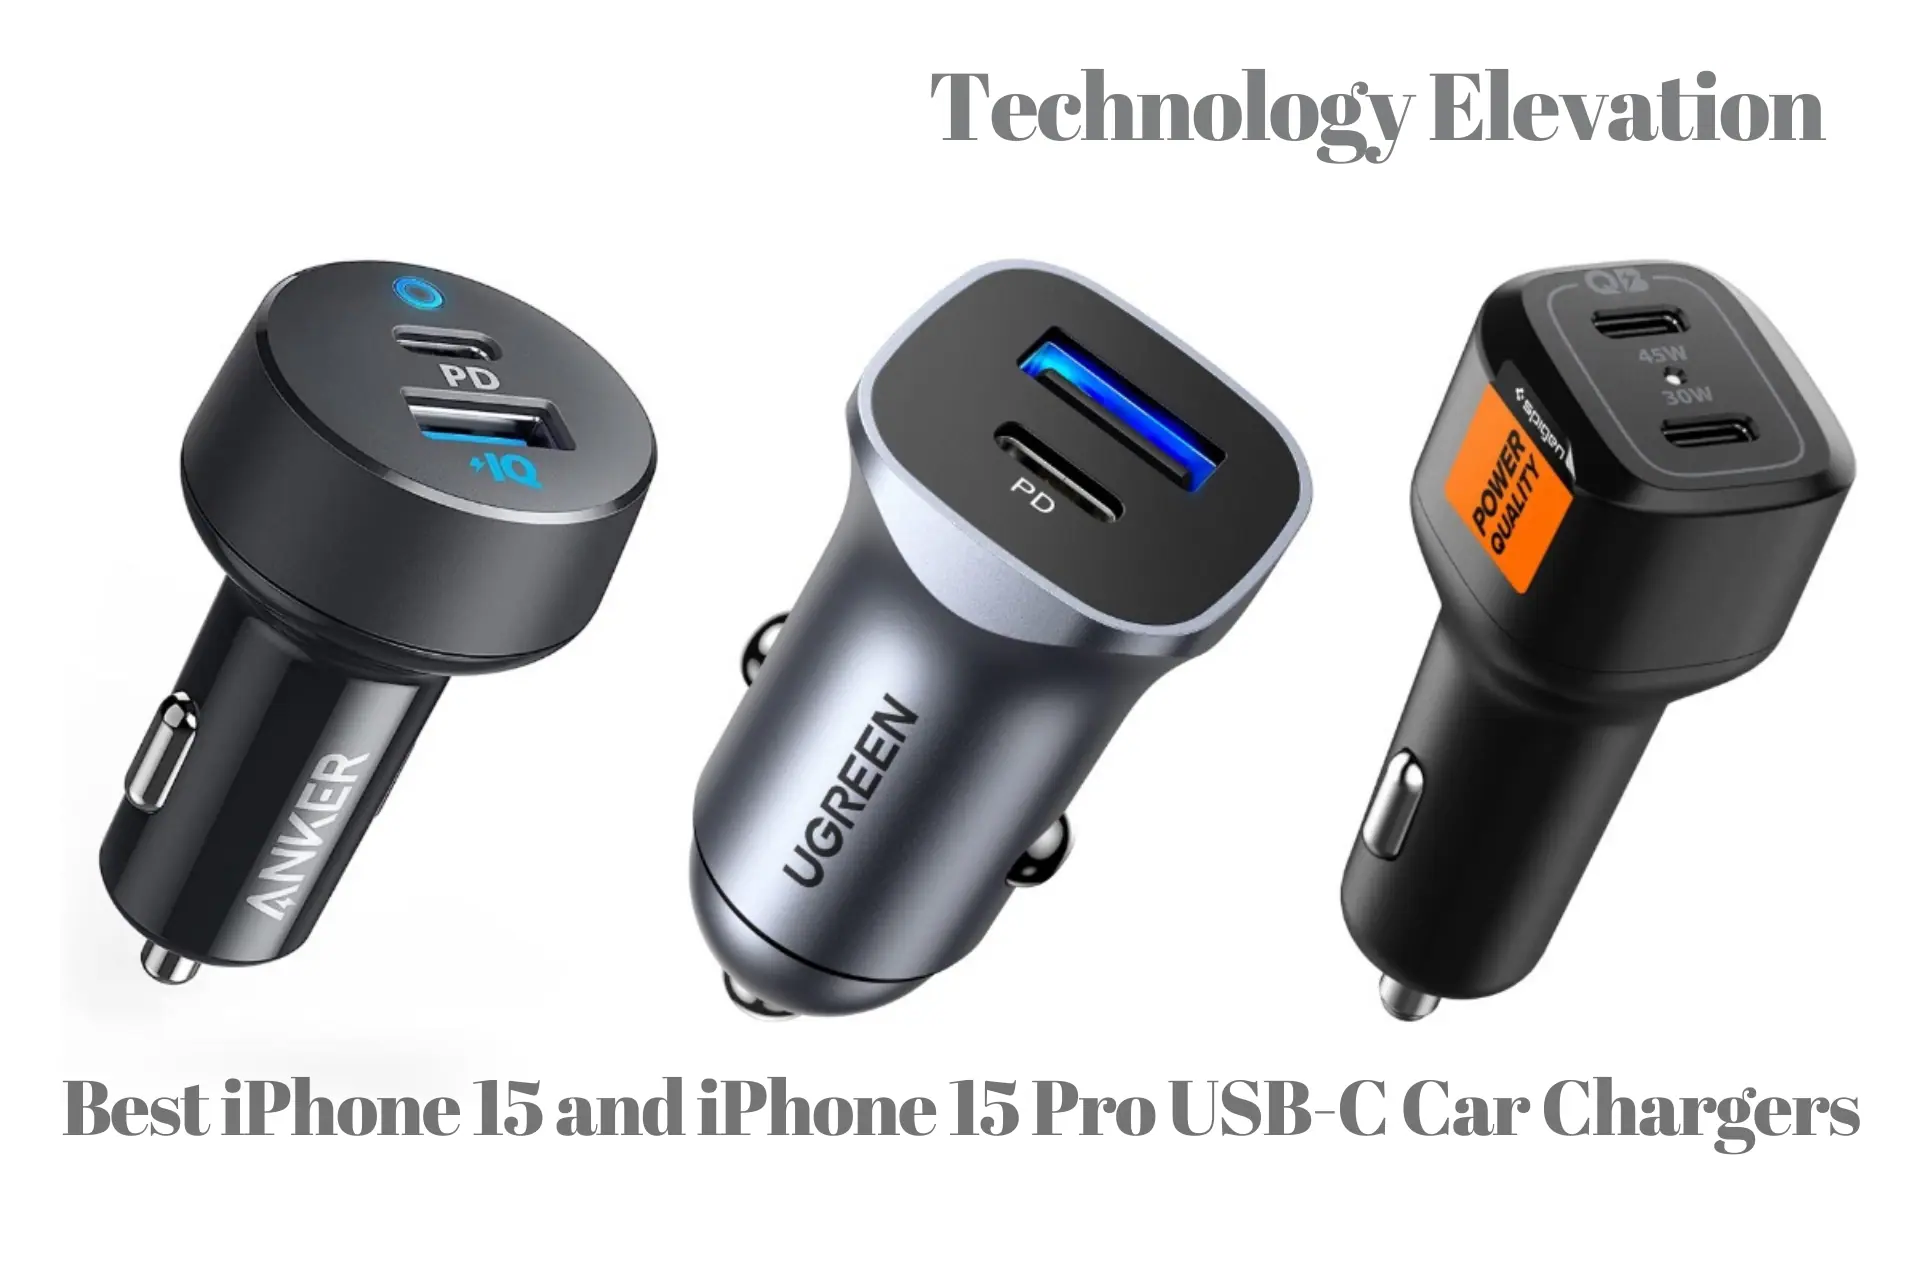 Best iPhone 15 and iPhone 15 Pro USB-C Car Chargers